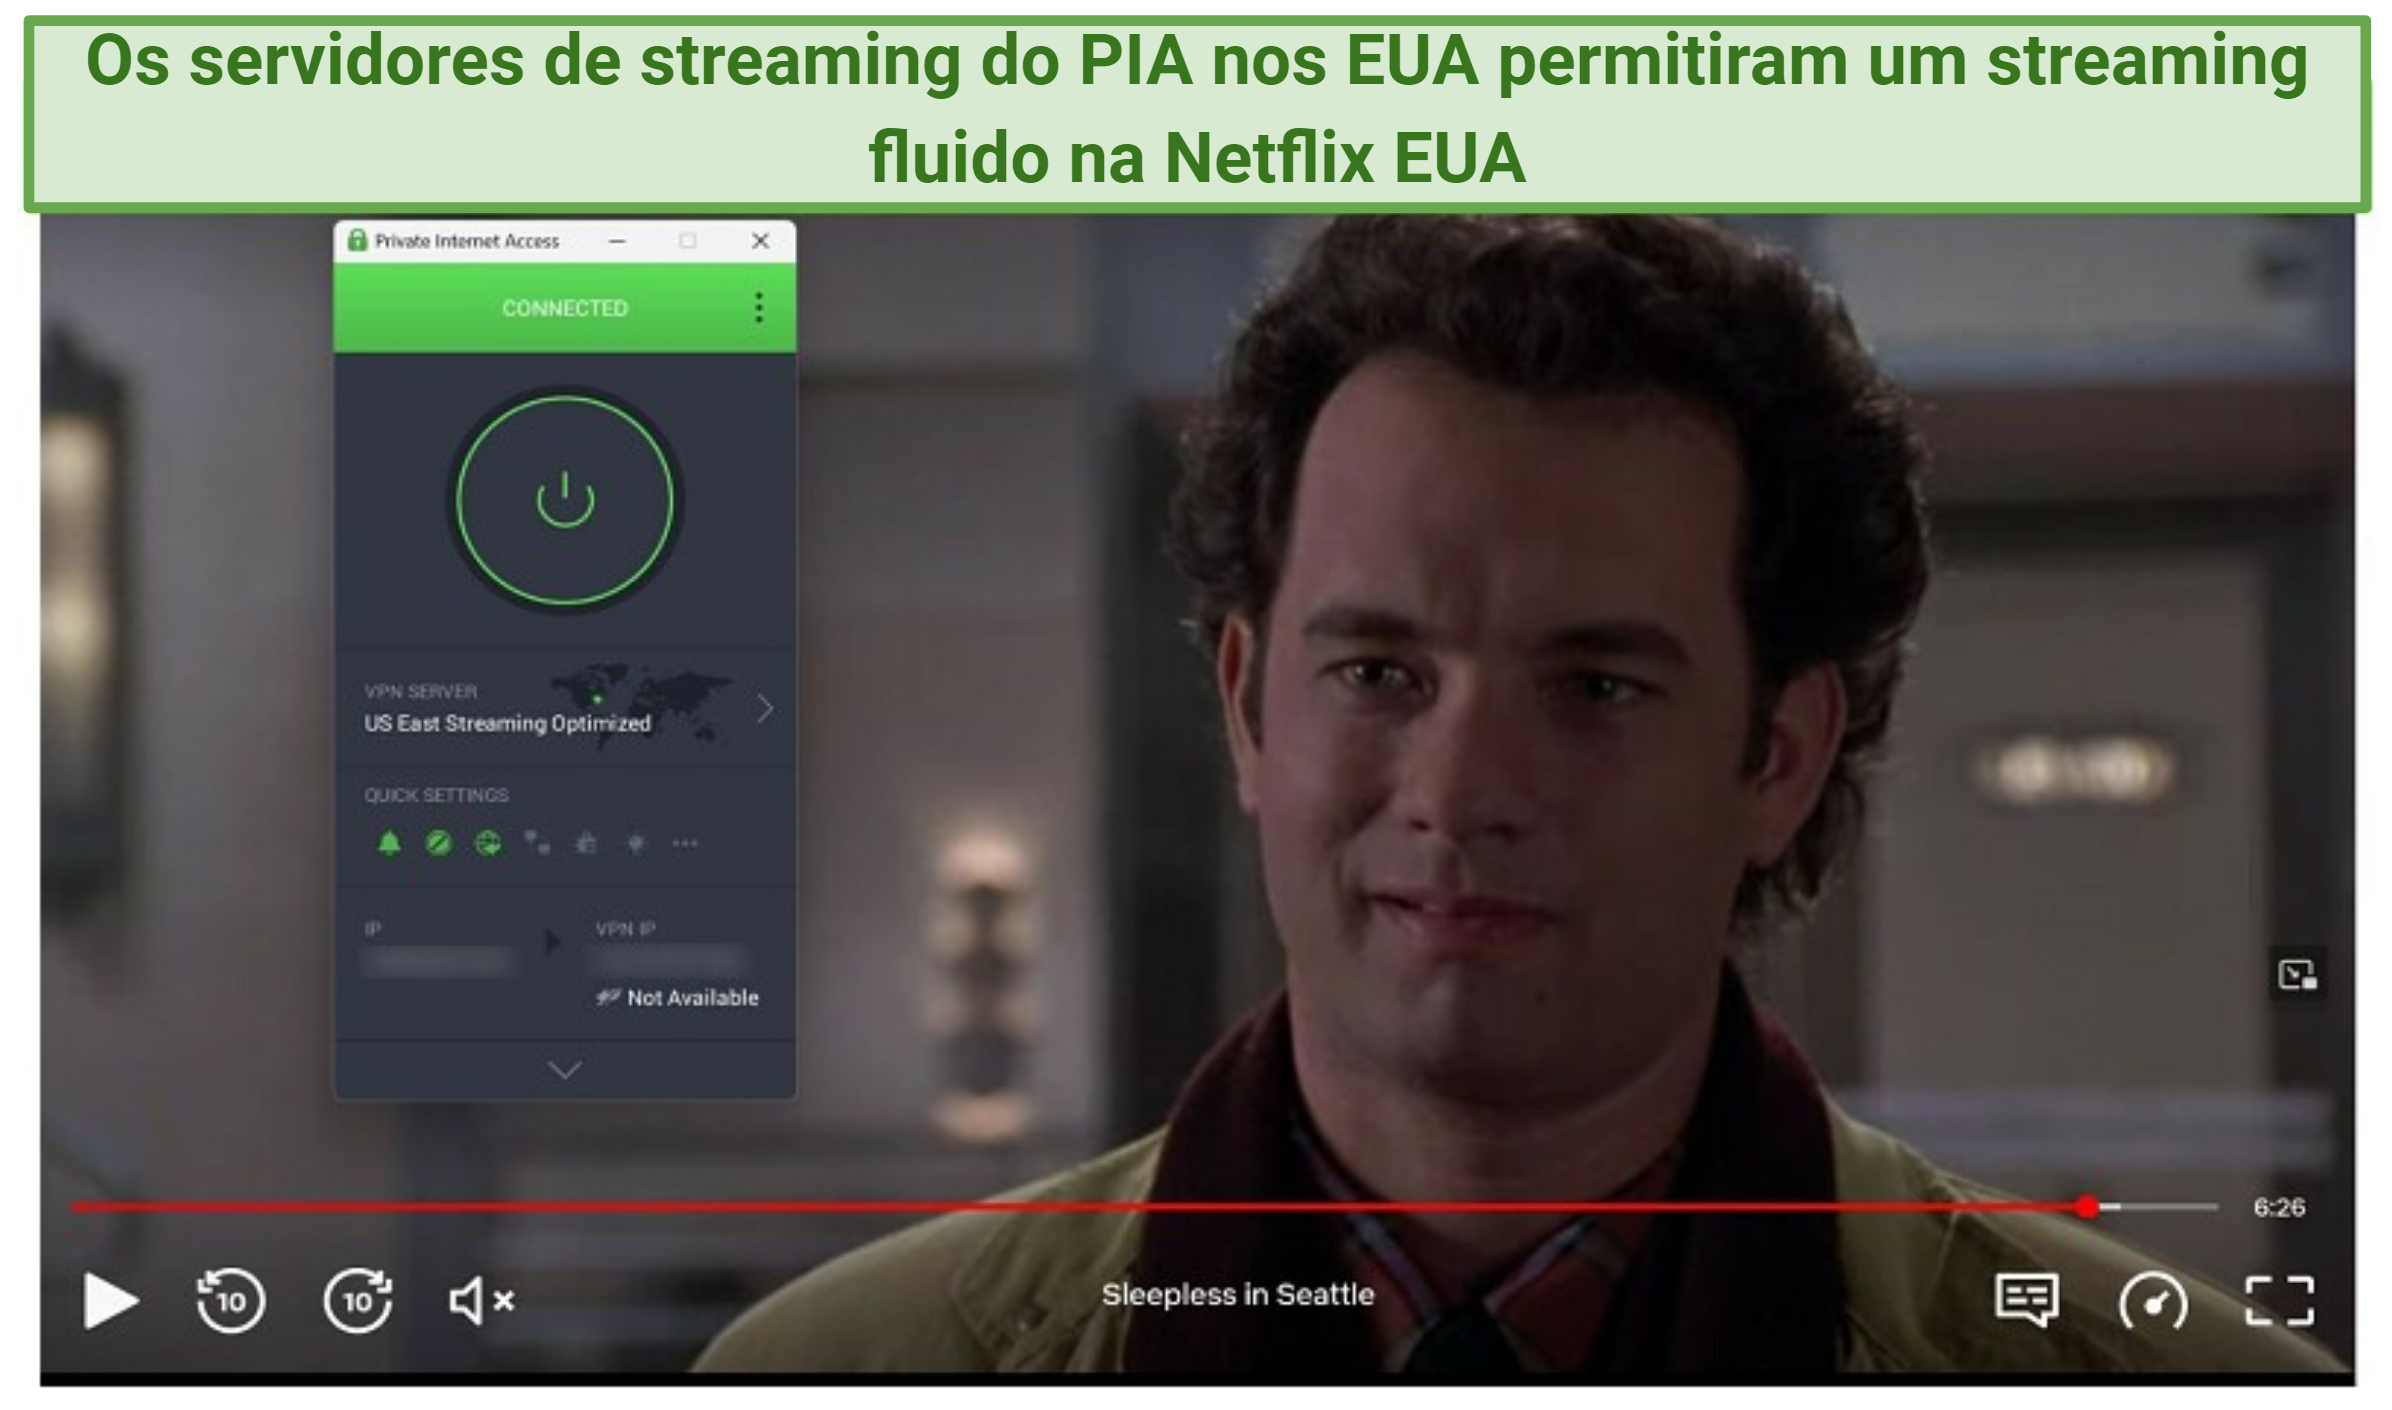 PIA US server streaming Sleepless in Seattle on US Netflix